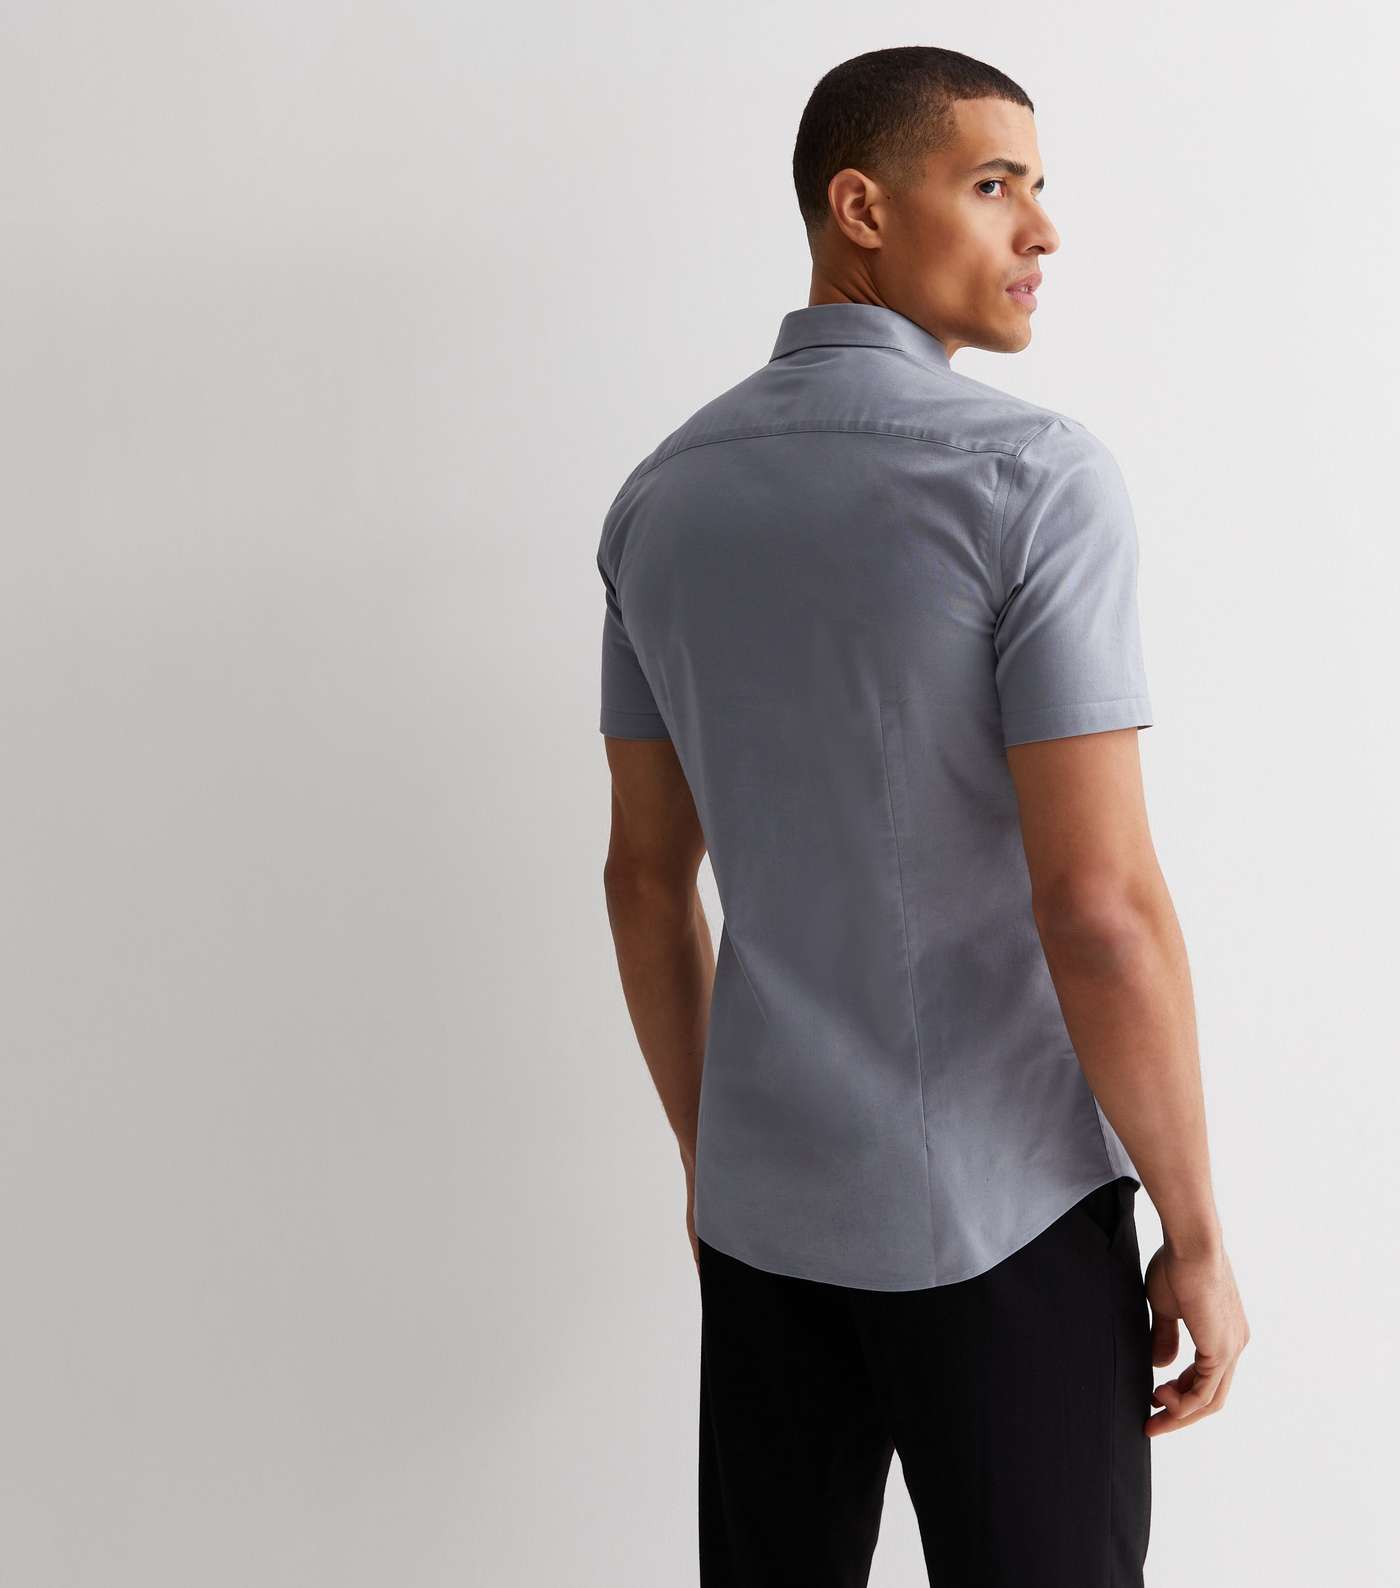 Pale Grey Short Sleeve Muscle Fit Oxford Shirt Image 4